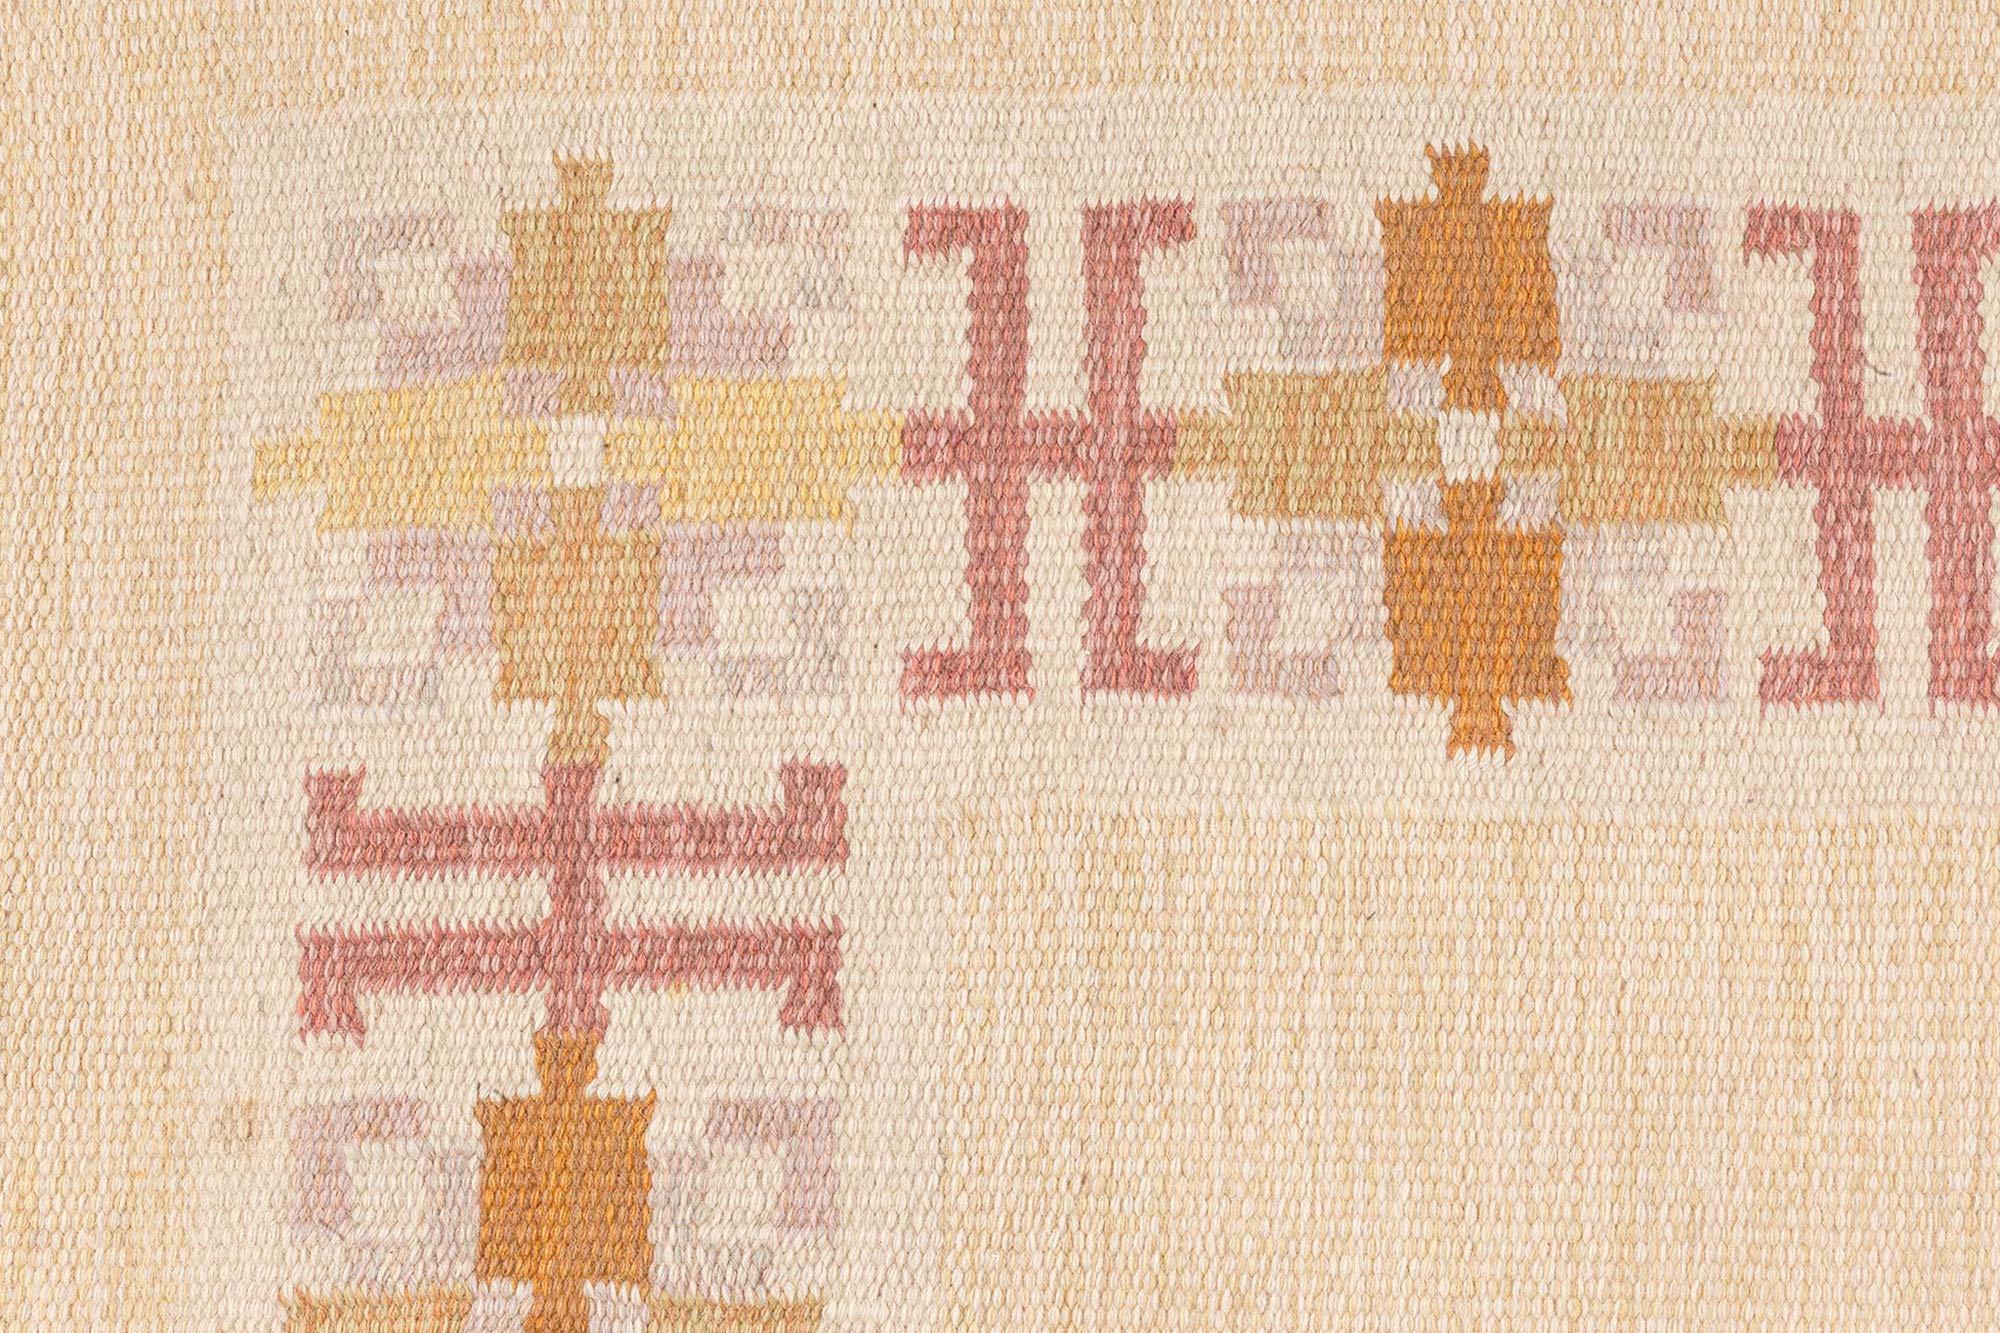 Vintage Swedish Flat Woven Rug by Fredrik Fiedler In Good Condition For Sale In New York, NY